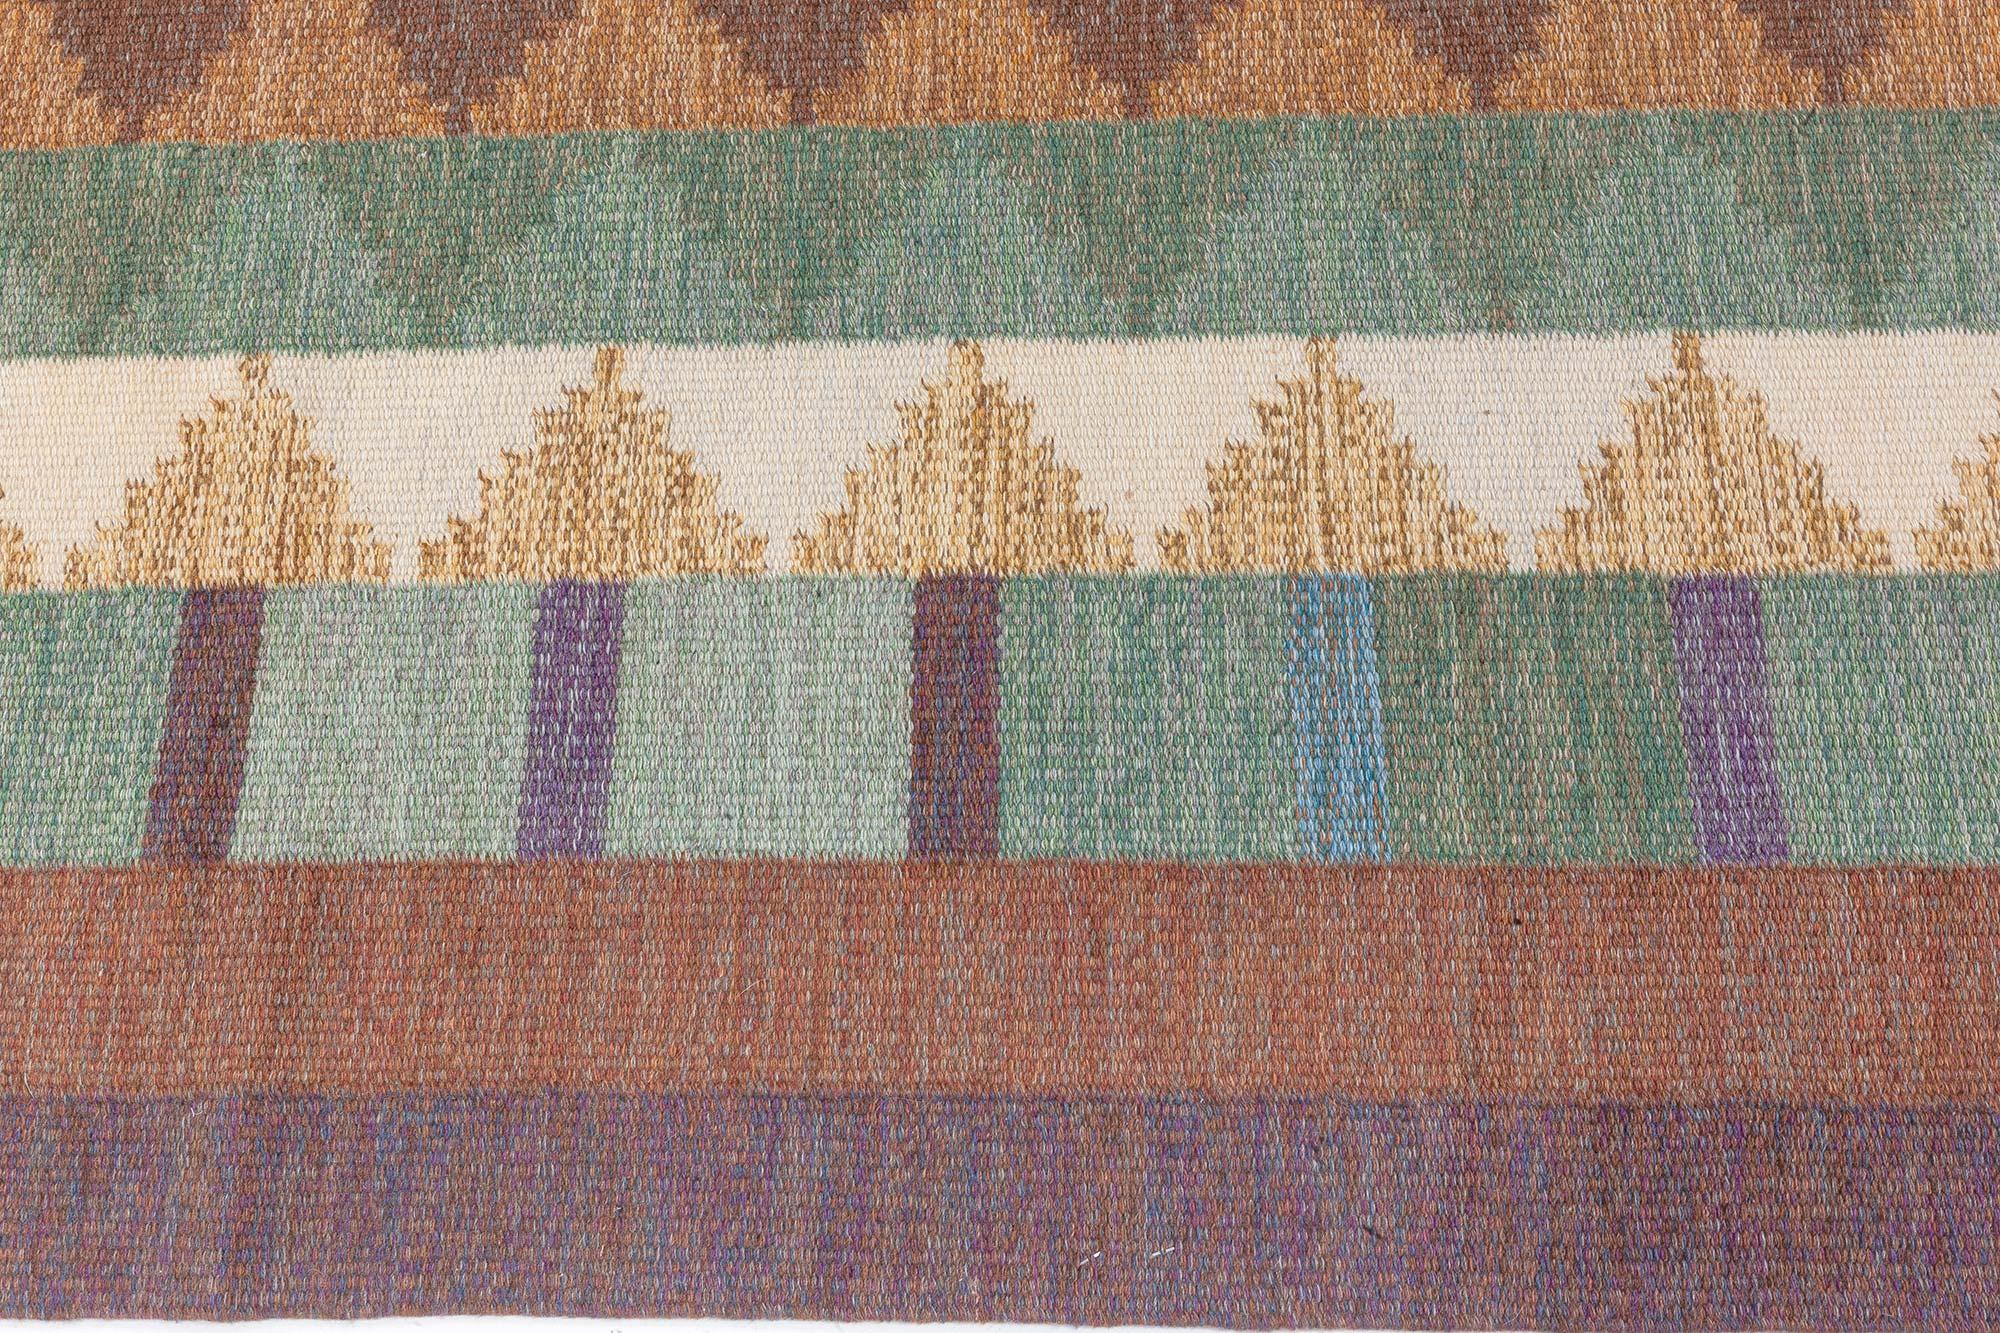 Hand-Woven Vintage Swedish Flat Weave Rug Signed with Initials 'IV' For Sale